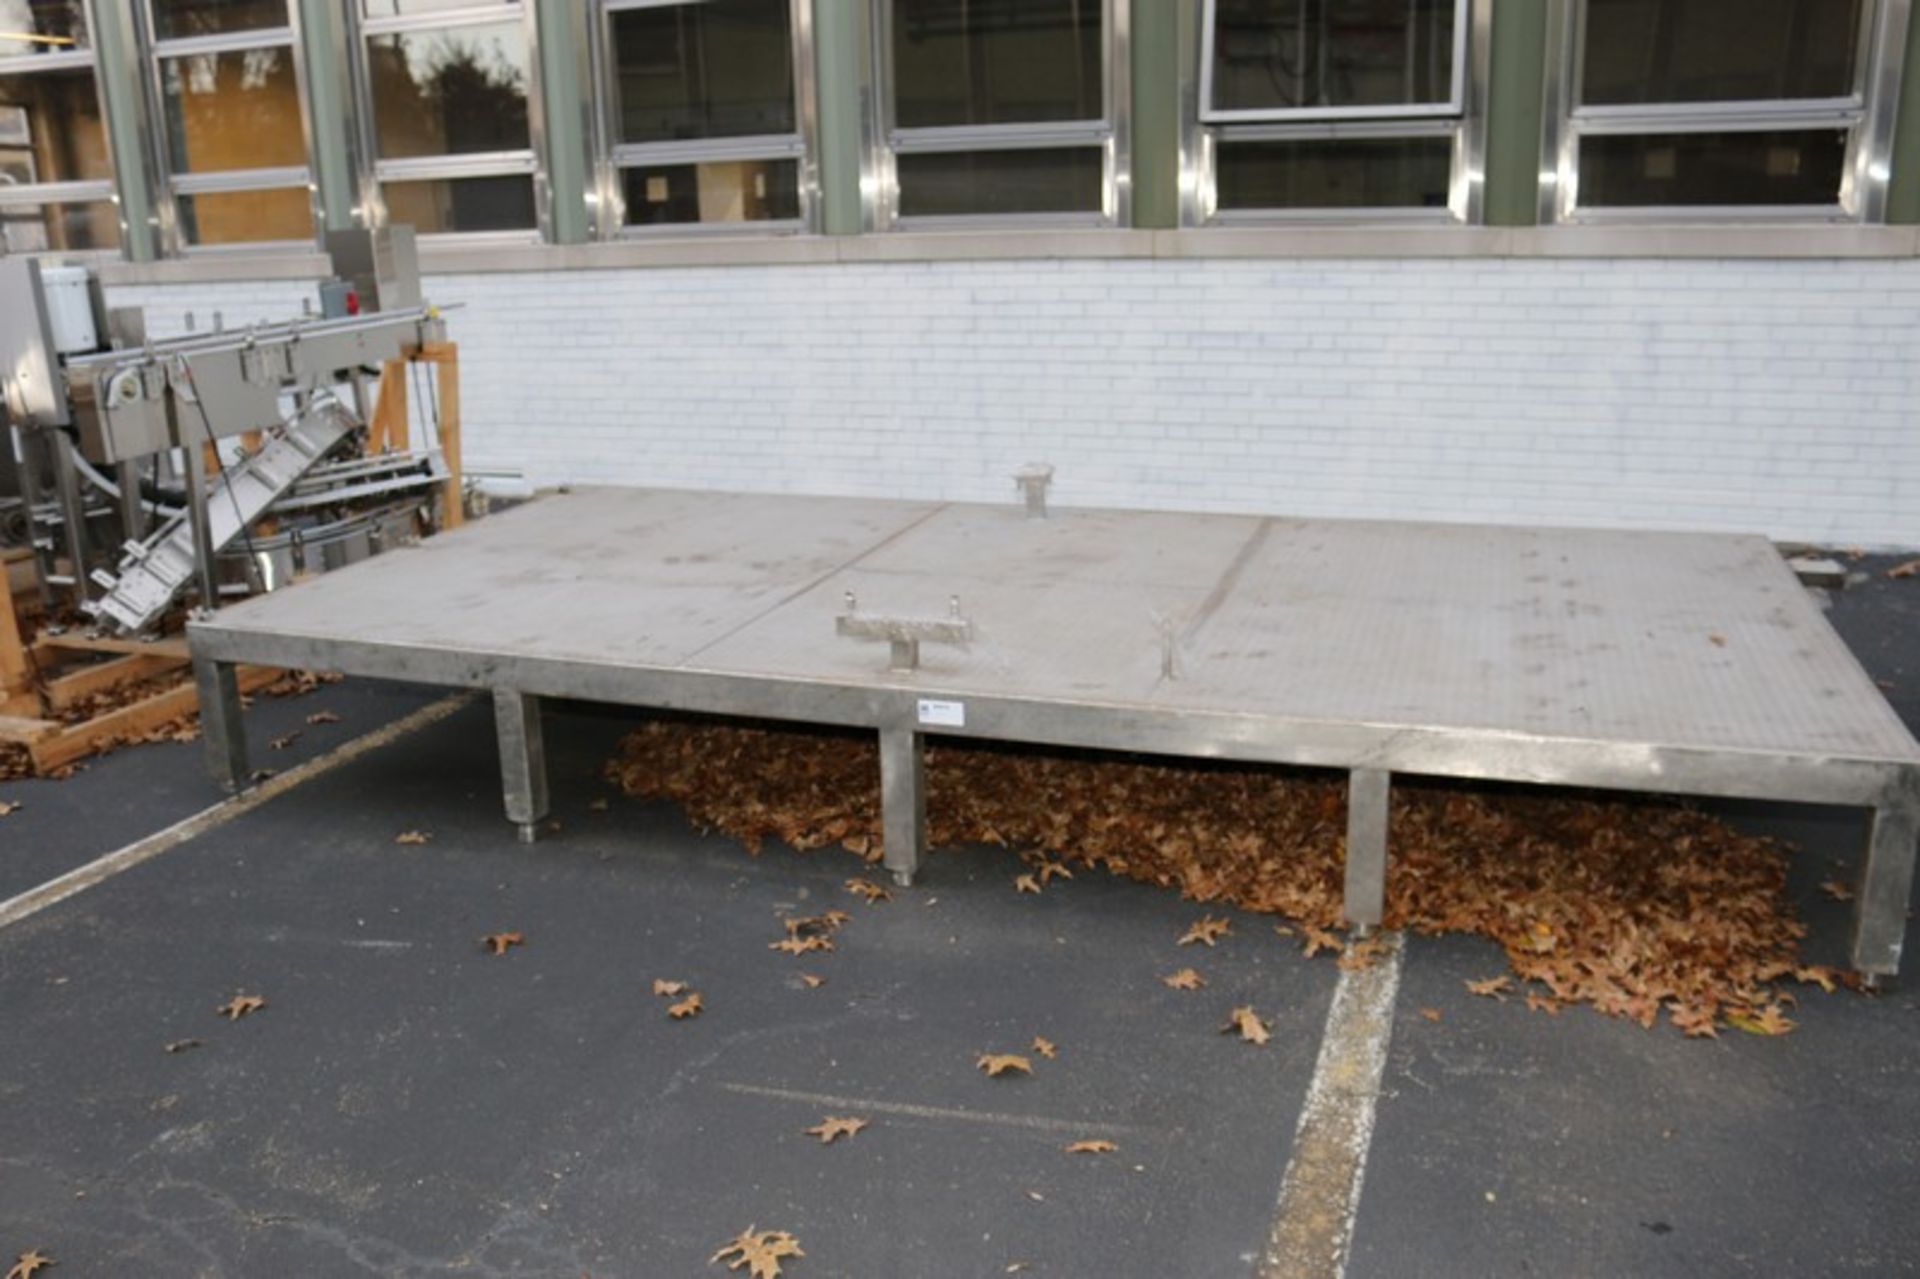 S/S Platform,Overall Dims.: Aprox. 161" L x 78-1/2" W x 20" H (Platform to Ground with Some Hand